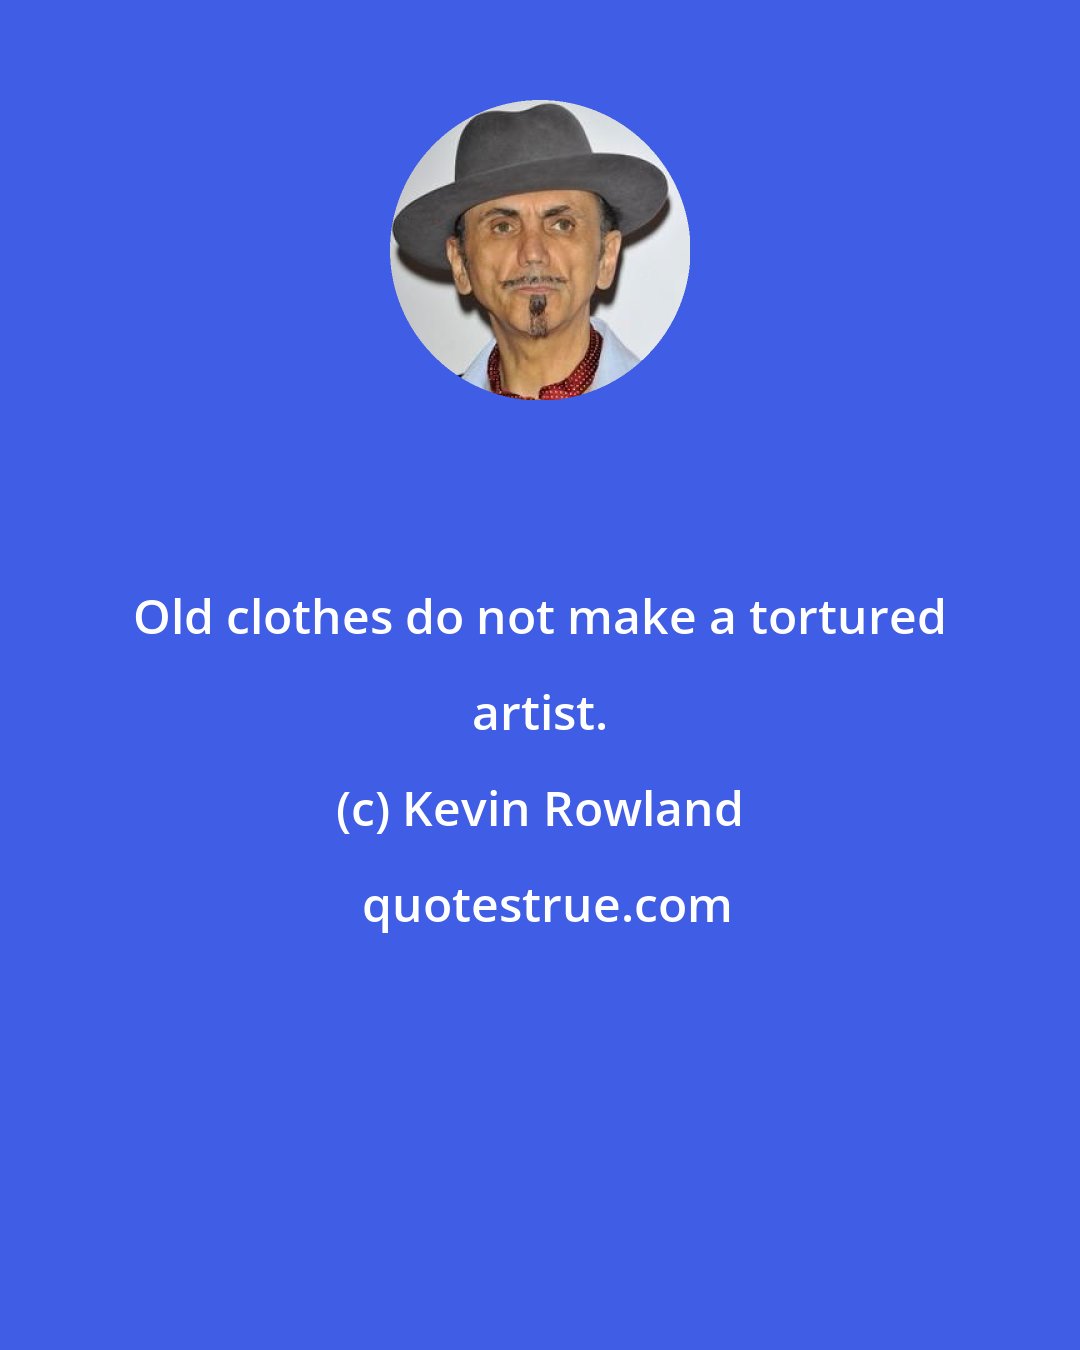 Kevin Rowland: Old clothes do not make a tortured artist.